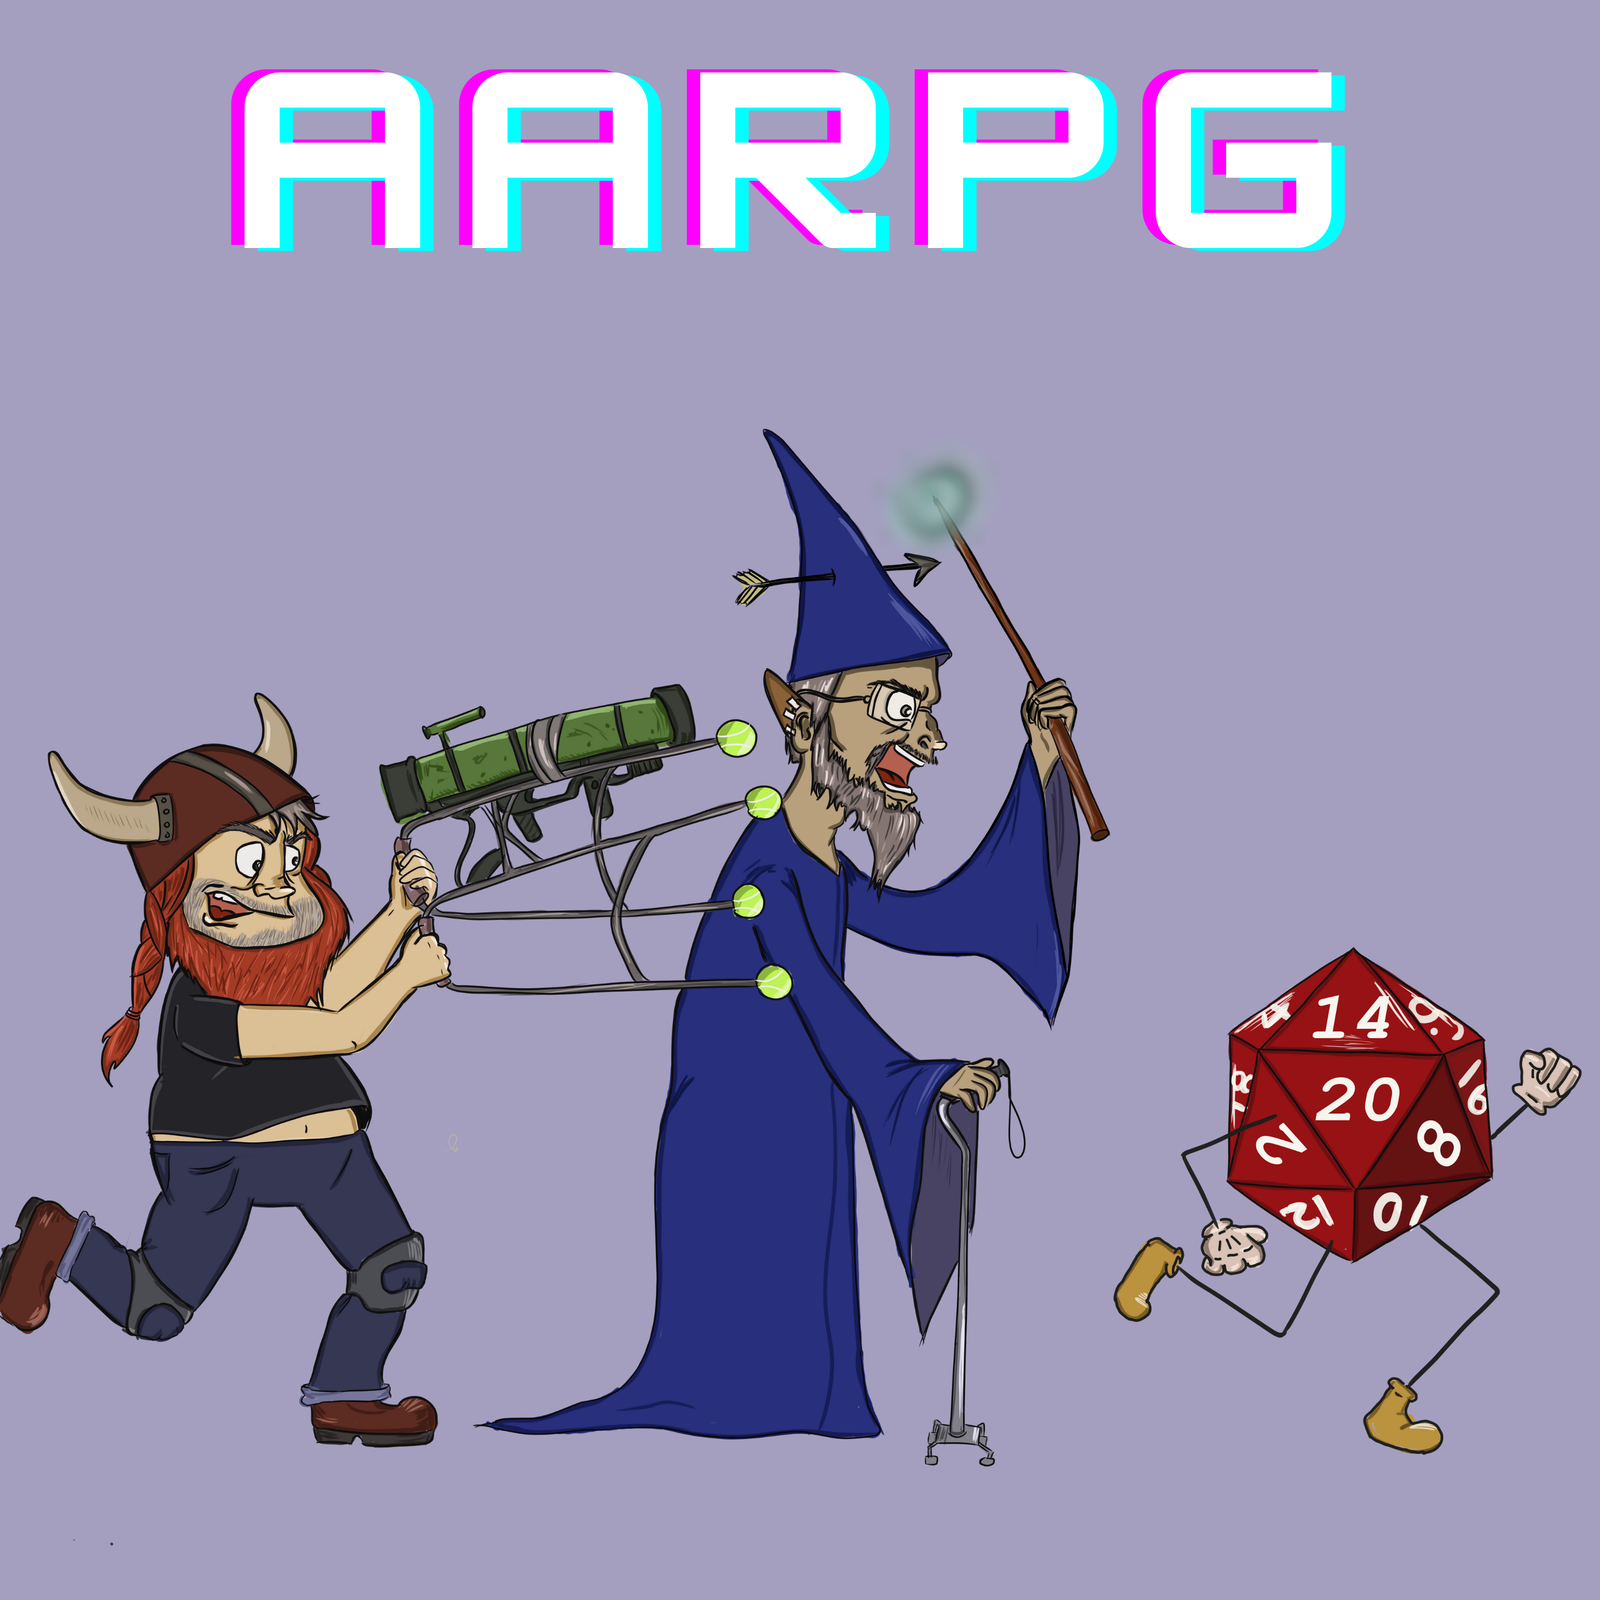 10: Session Zero - Welcome to the AARPG Podcast